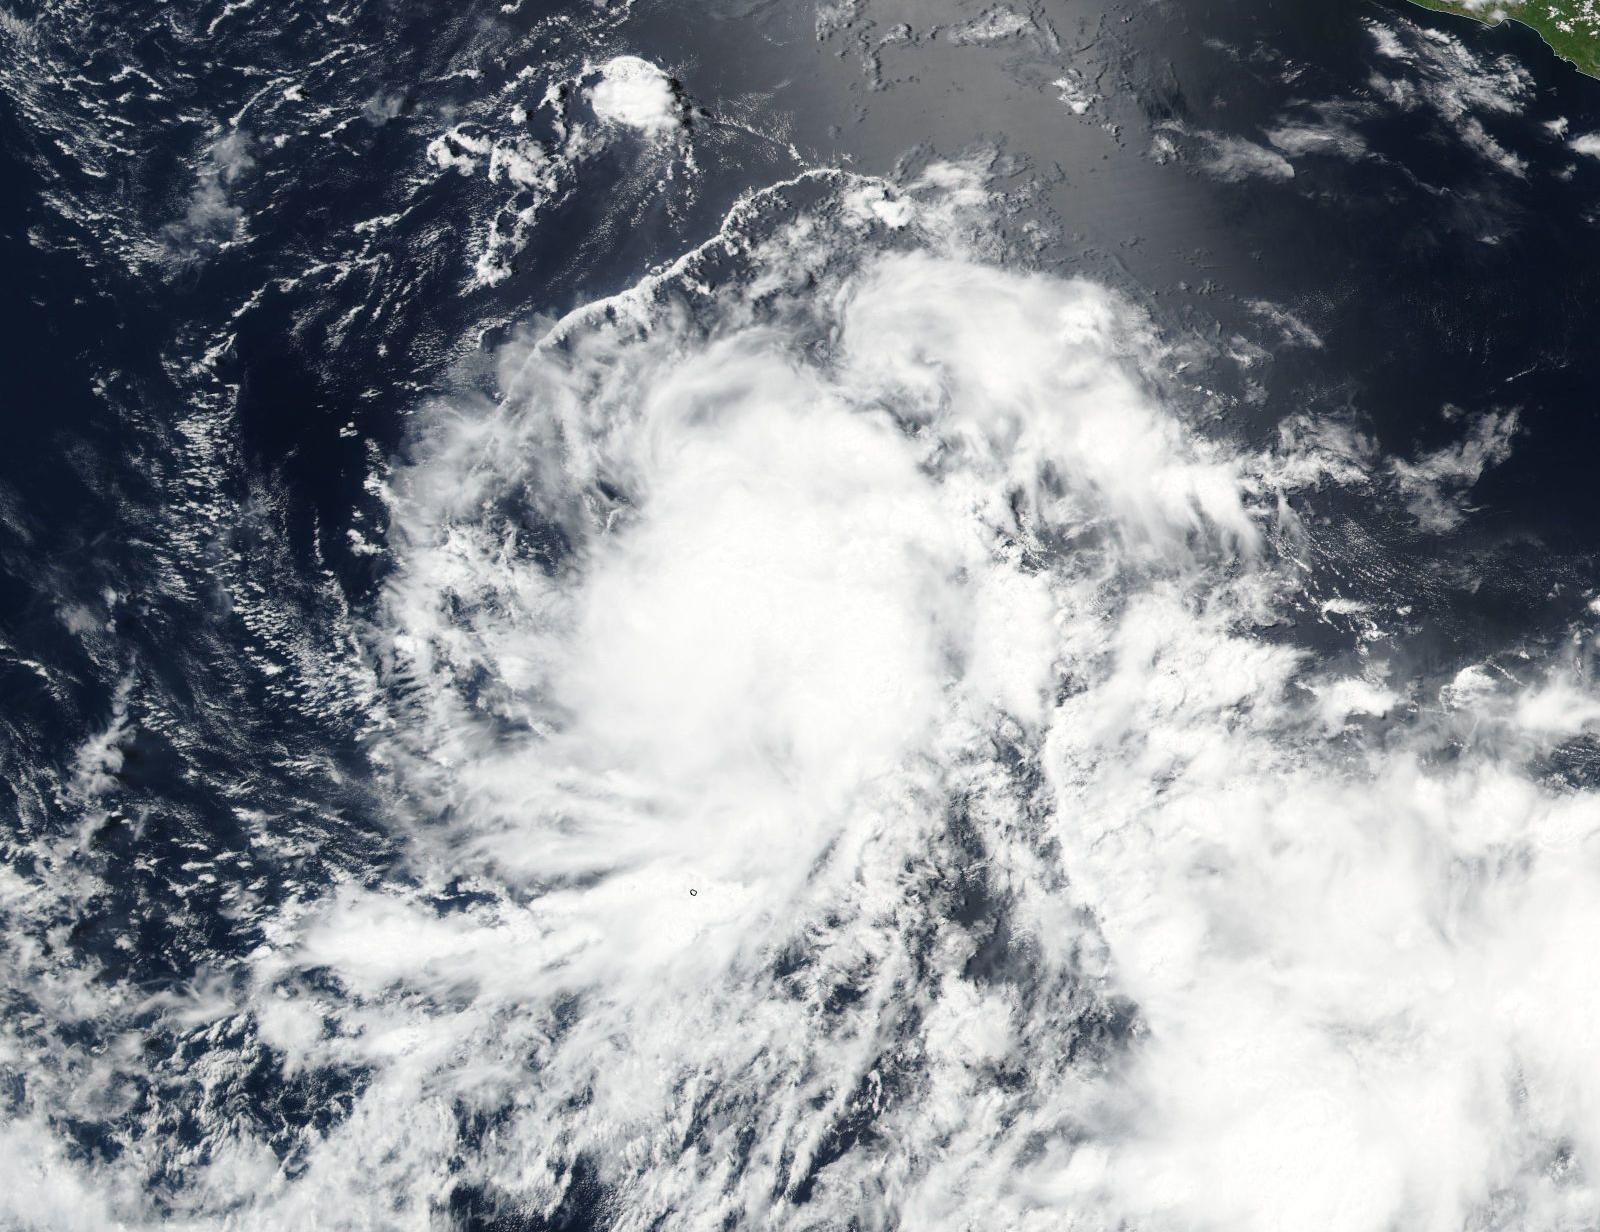 On July 6, the VIIRS instrument aboard NASA-NOAA-DOD's Suomi NPP satellite captured this visible light image of Tropical Depress